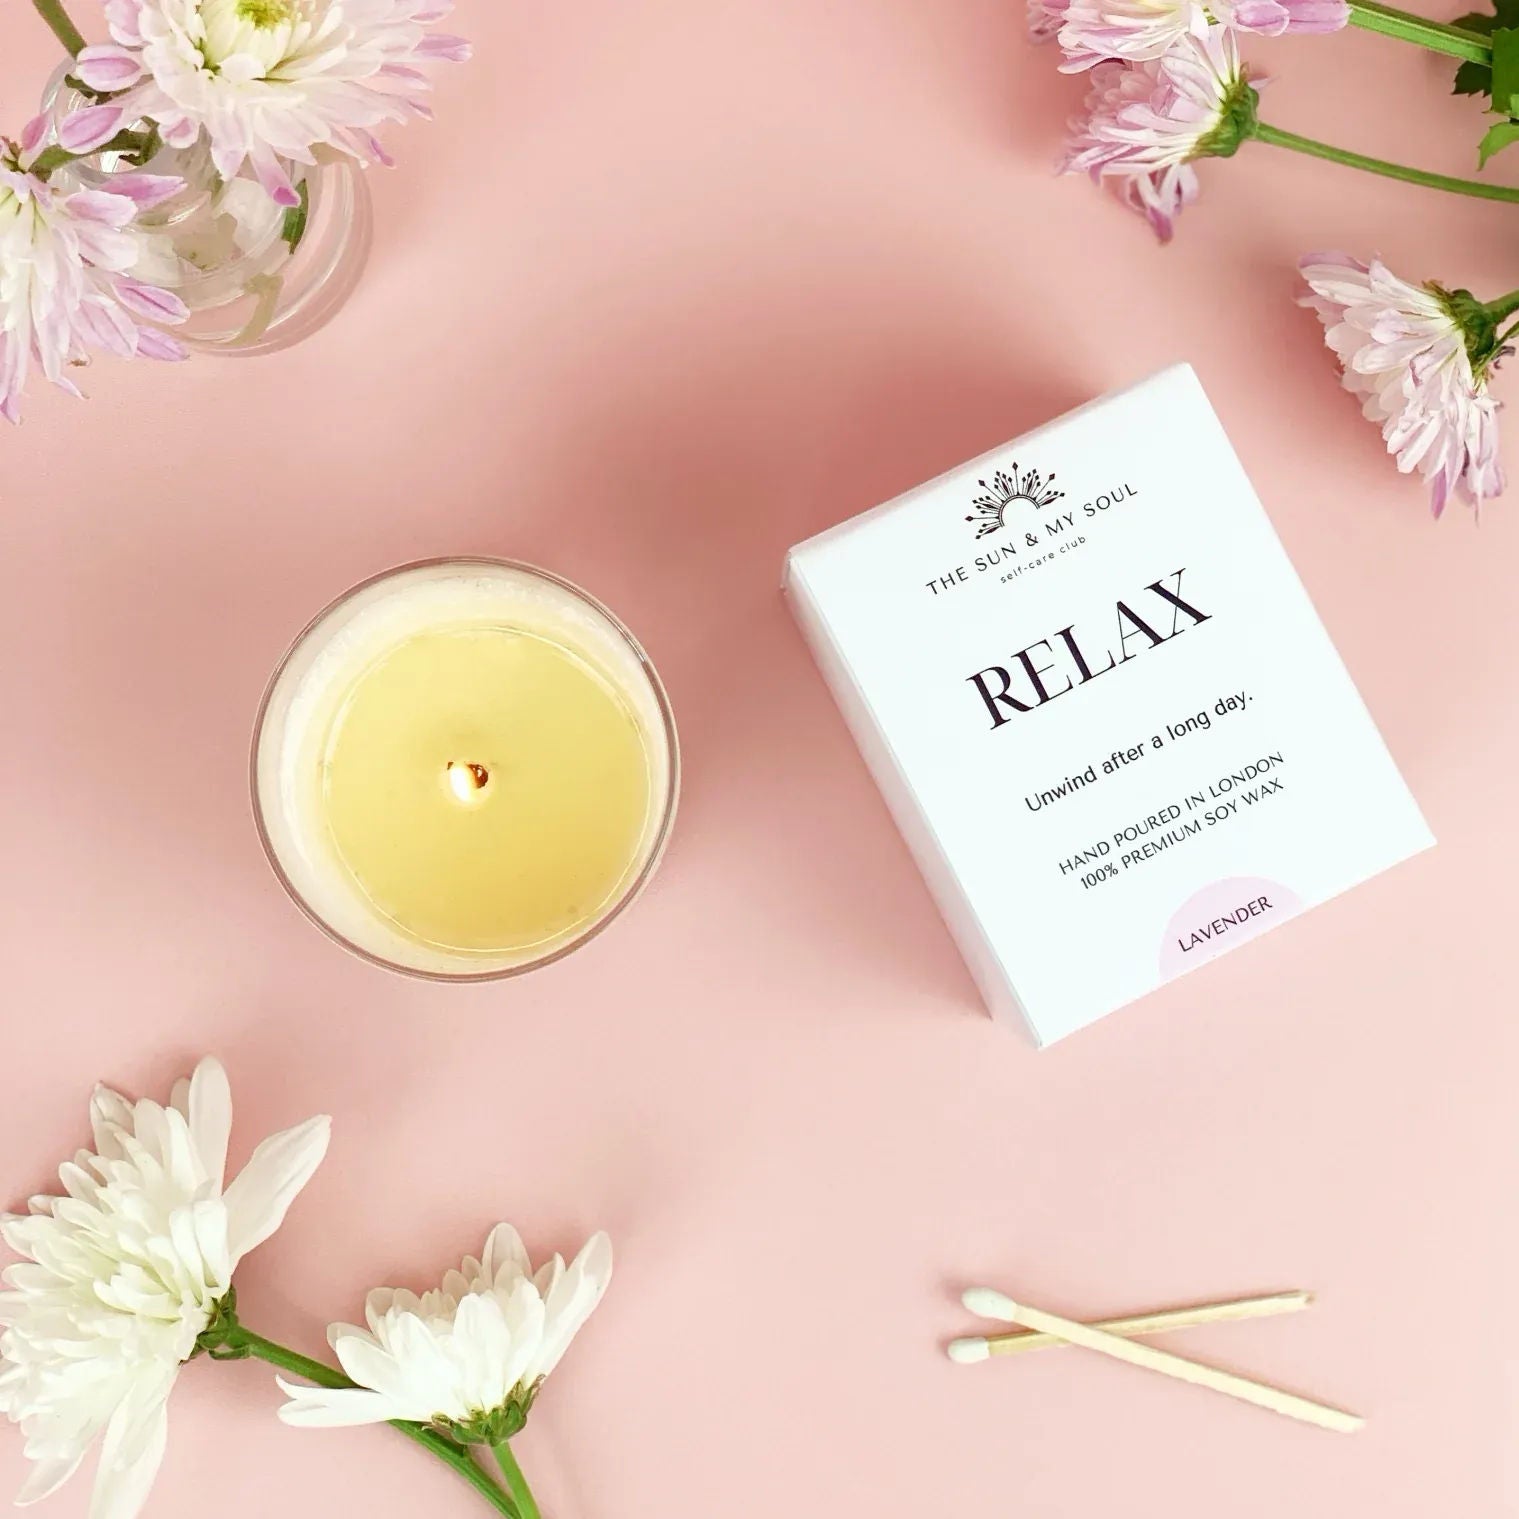 Relax - Lavender Scented Premium Soy Wax Candle